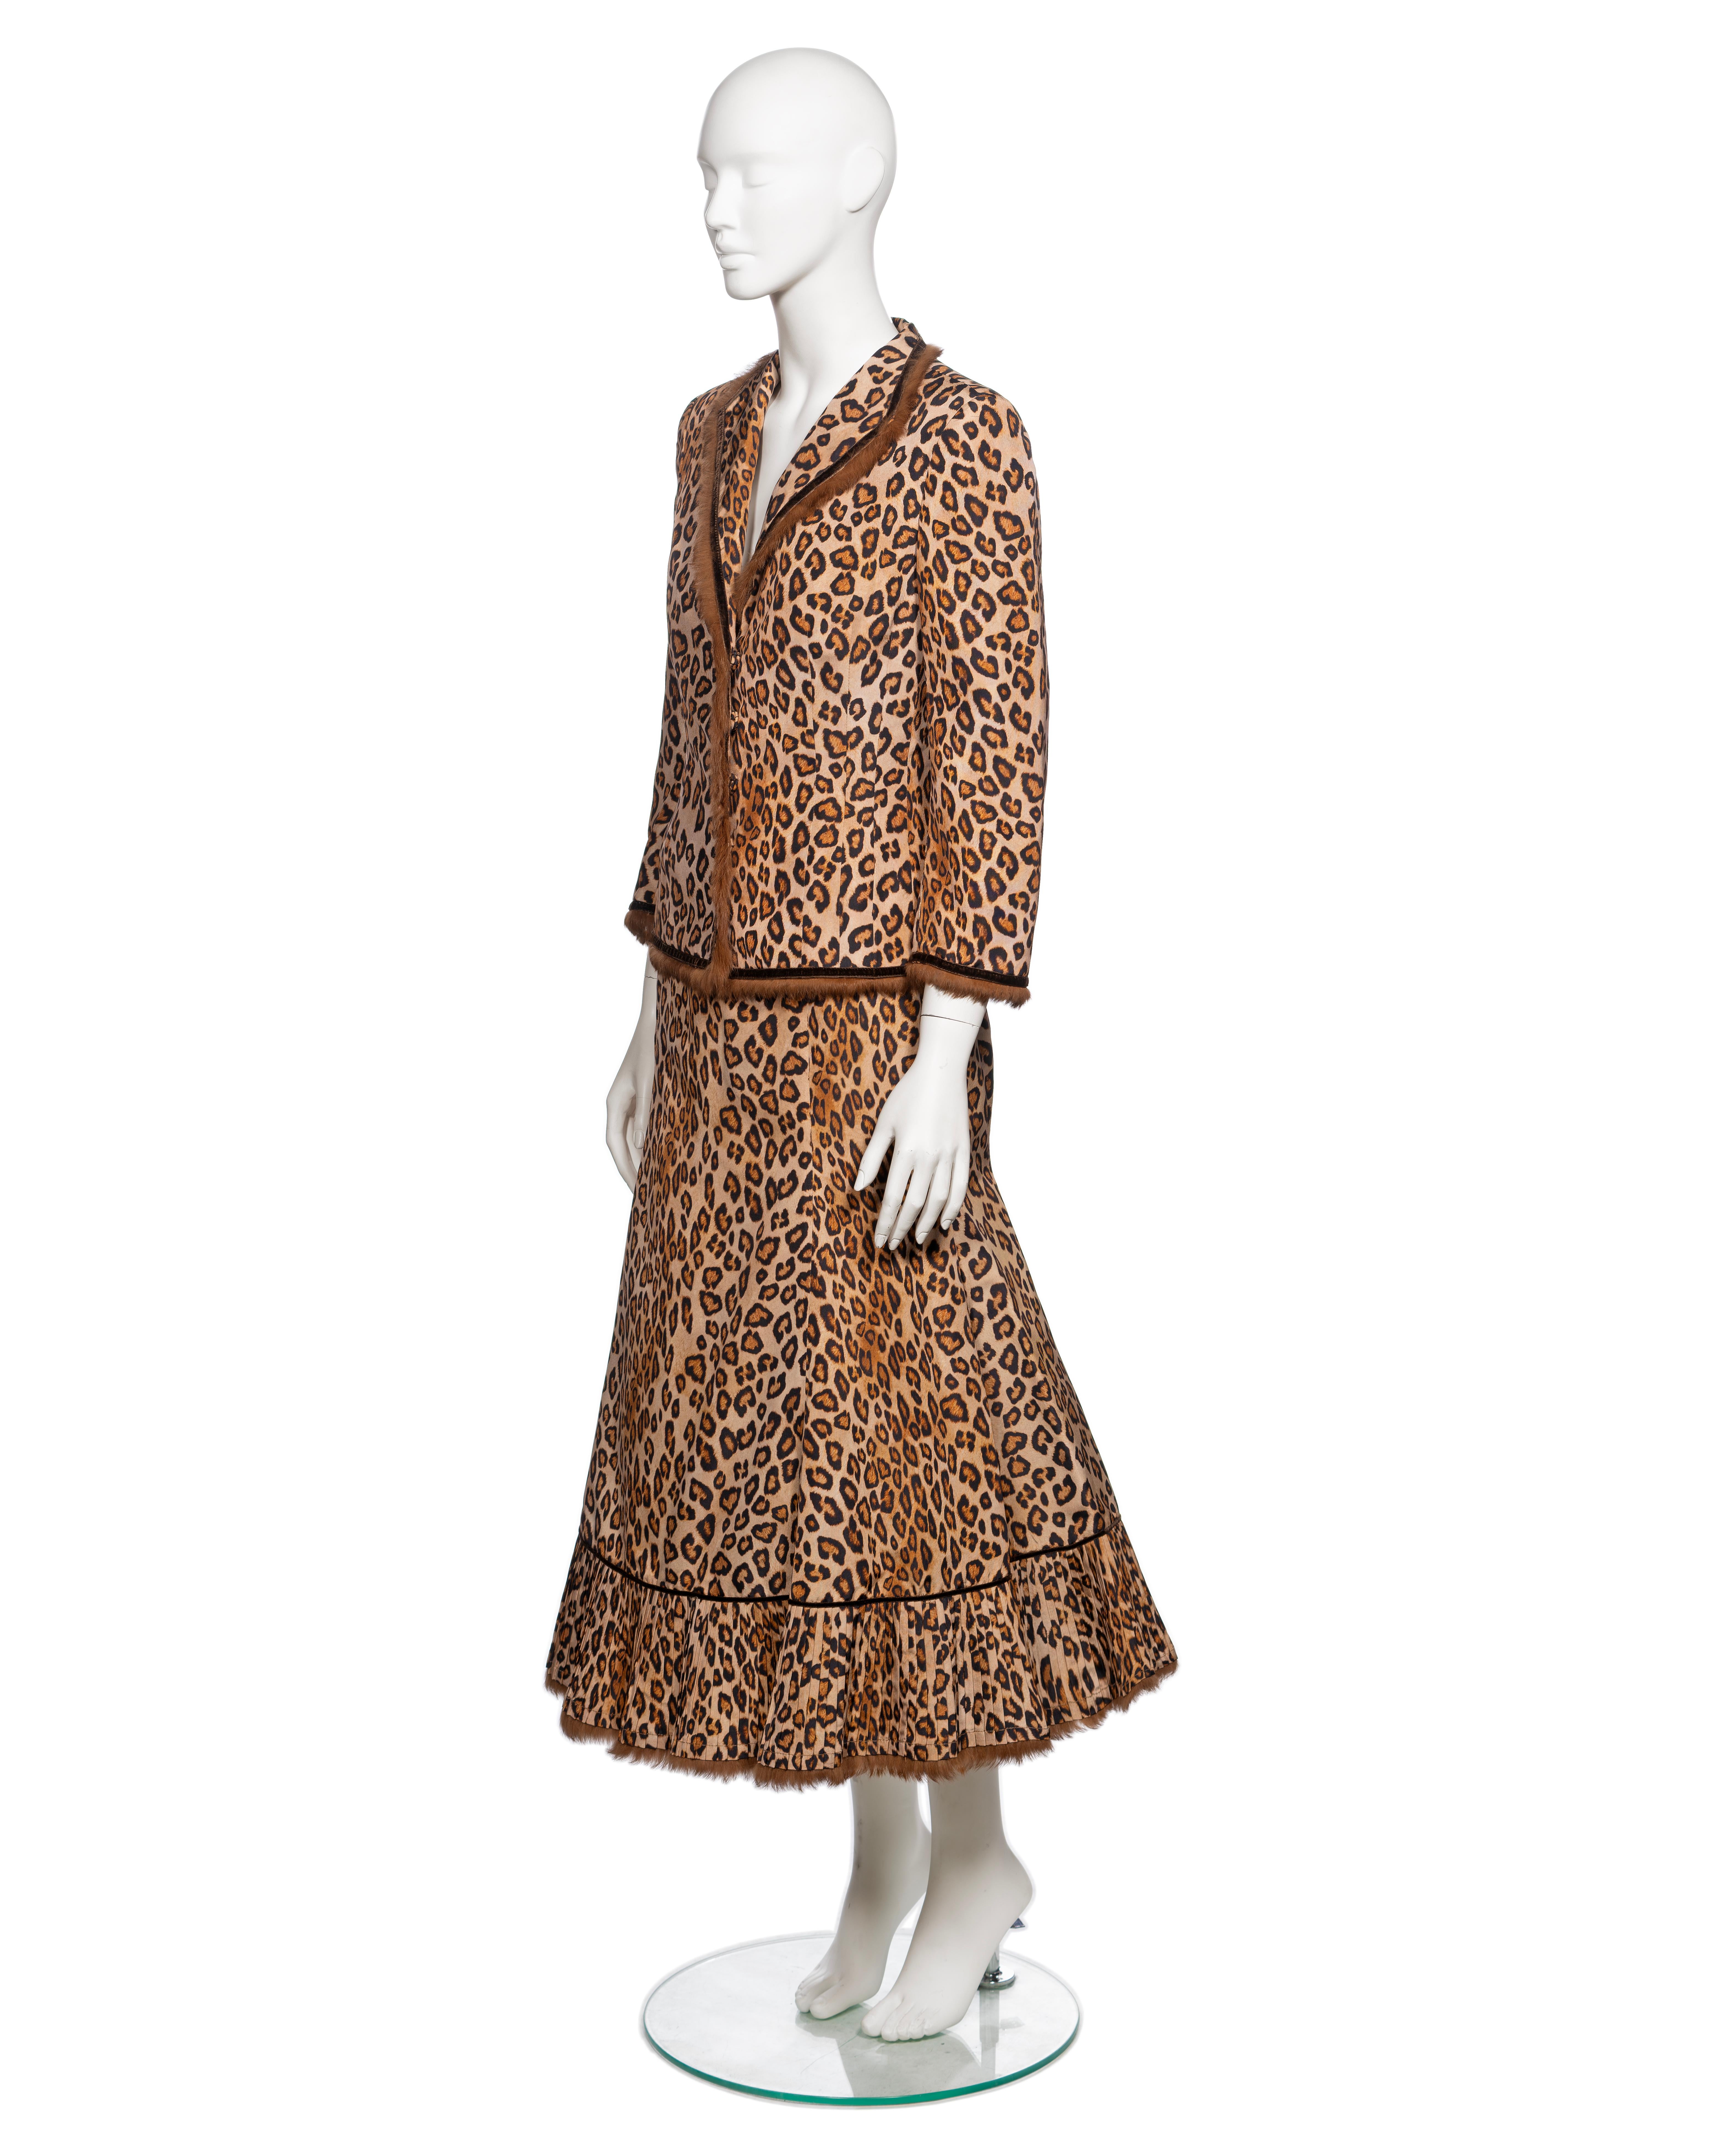 Alexander McQueen Leopard Print Silk and Fur Jacket and Skirt Suit, FW 2005 For Sale 5